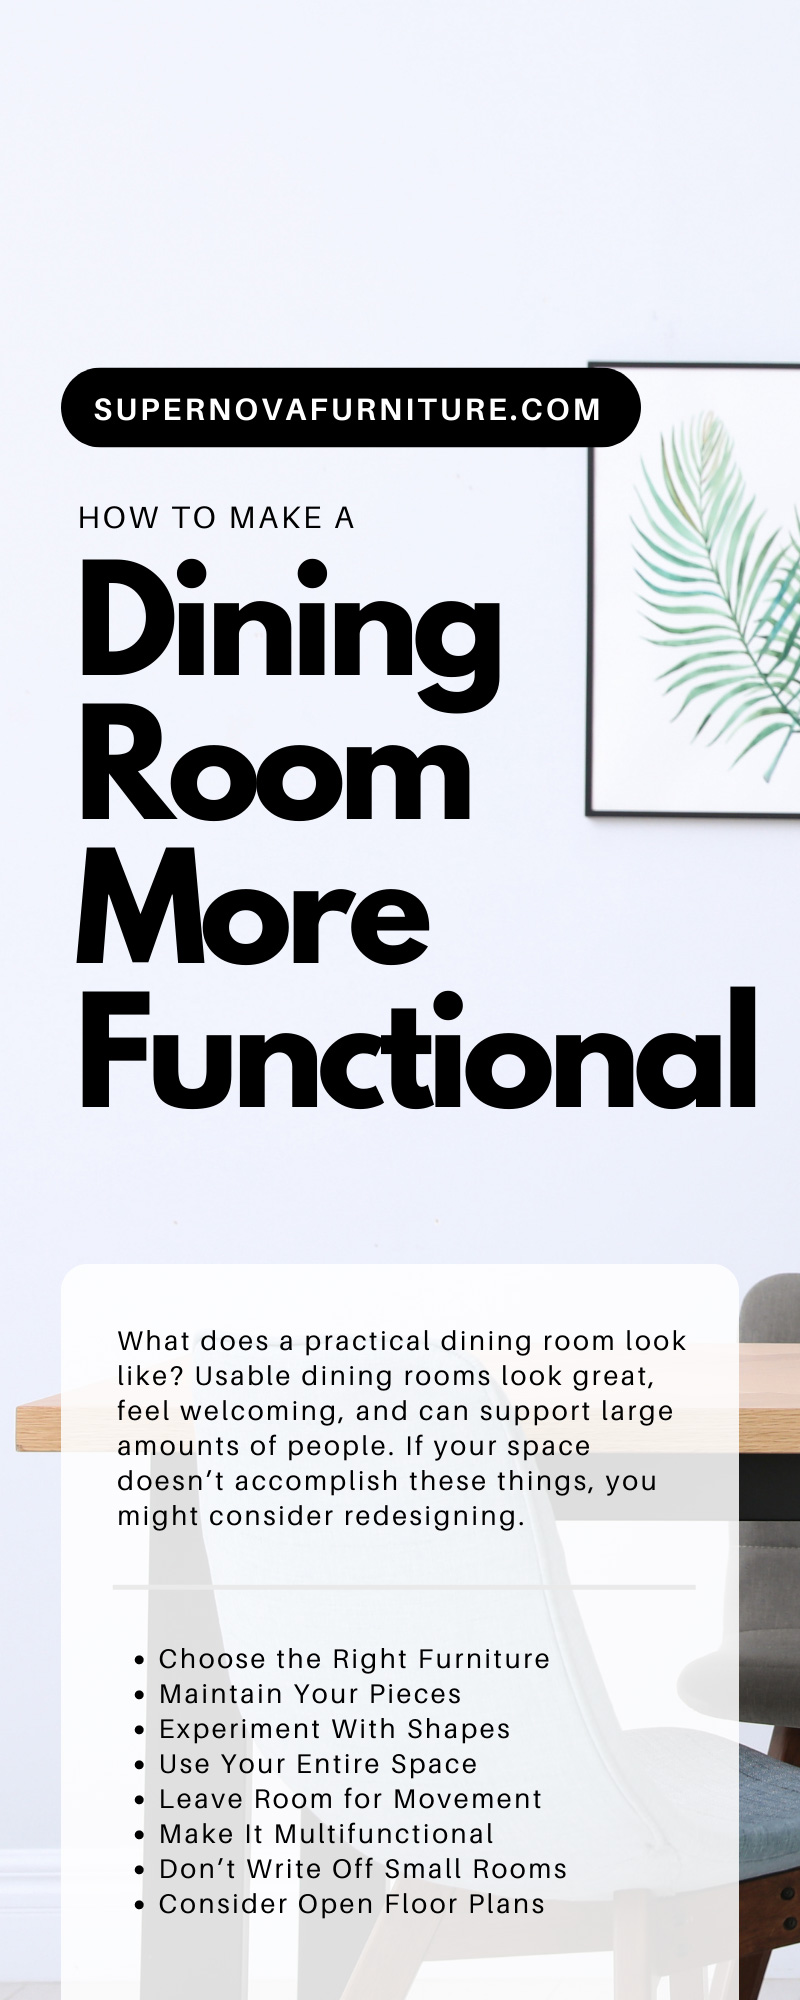 How To Make a Dining Room More Functional